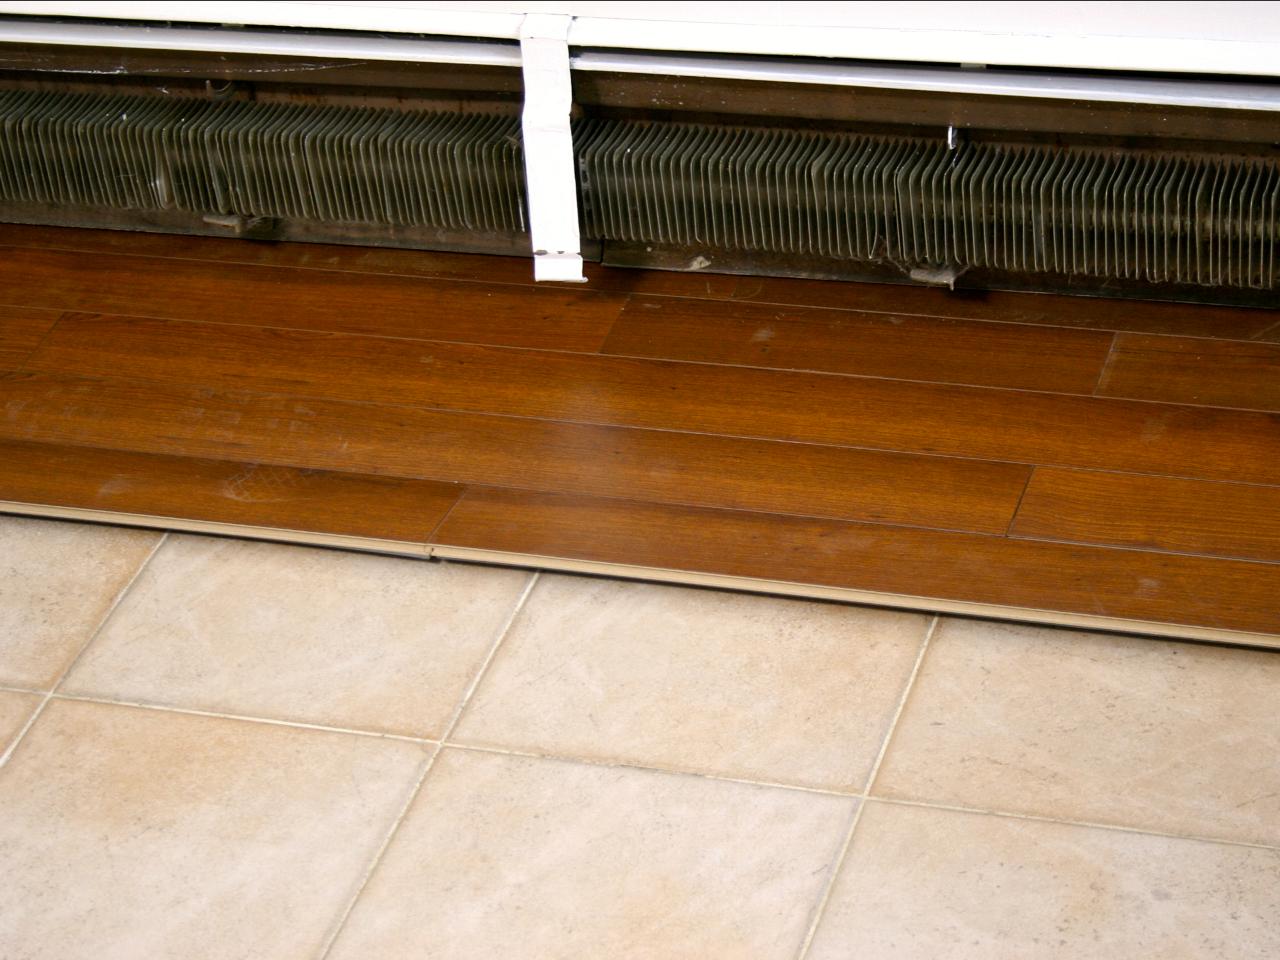 How To Install Lock Wood Flooring, How To Install Snap On Wood Flooring